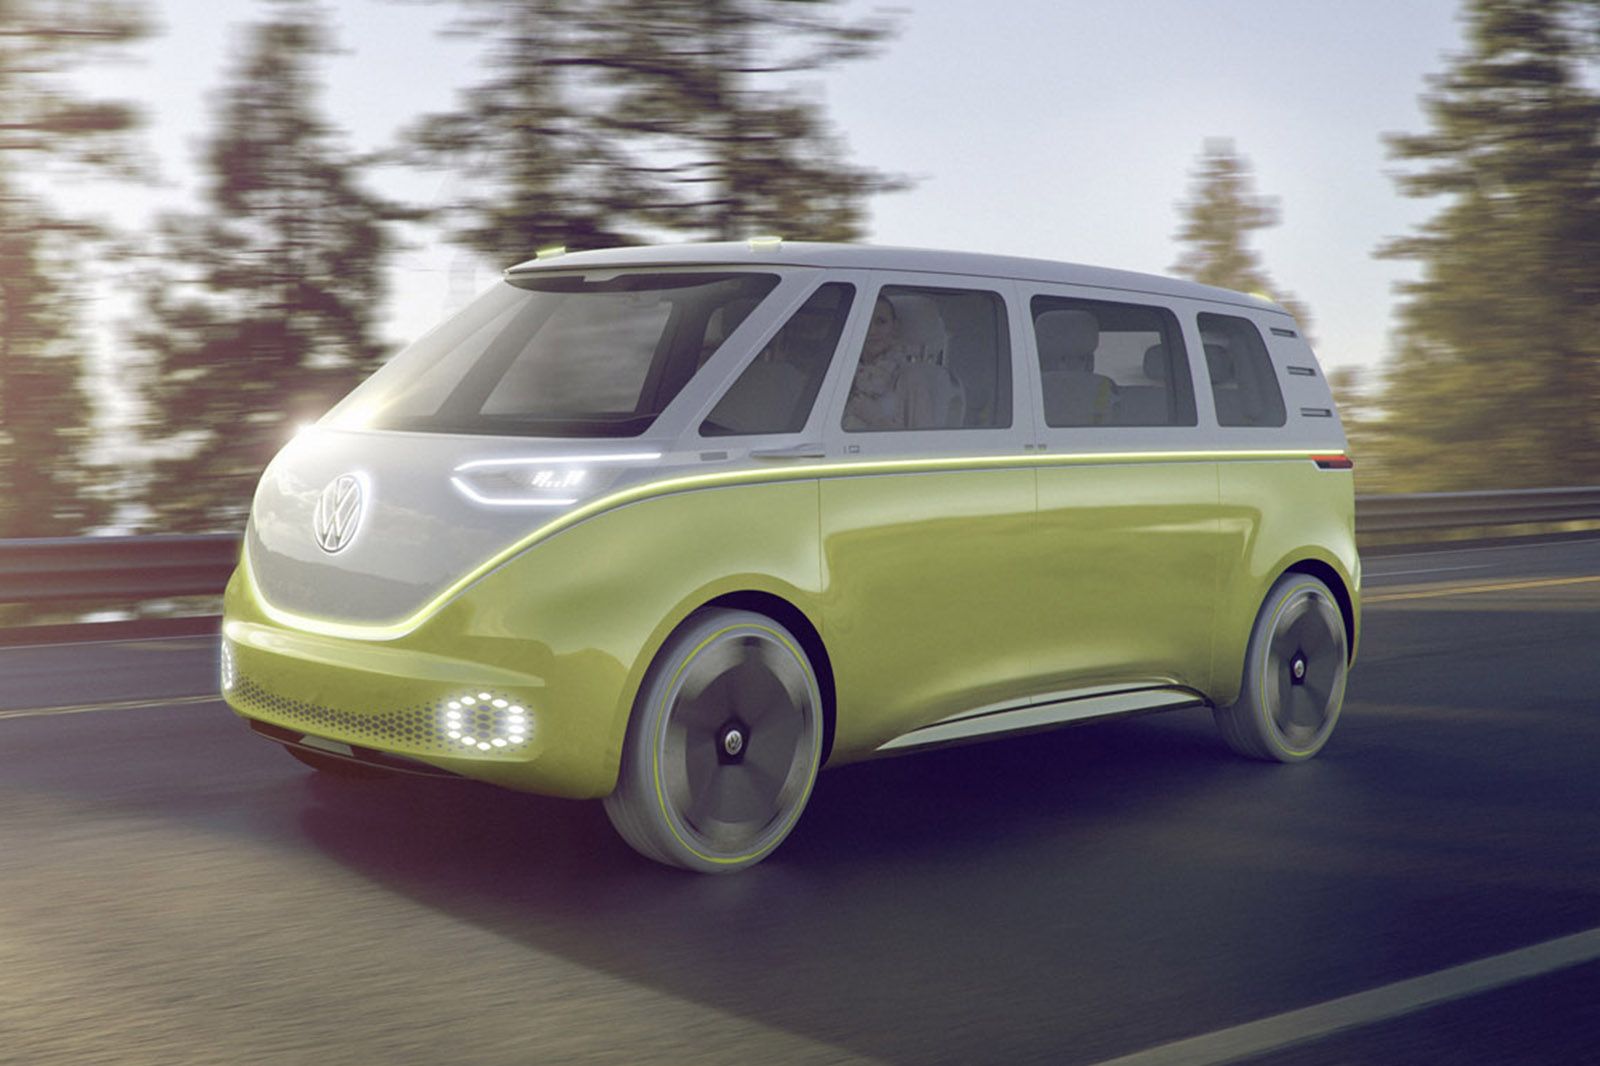 Volkswagen ID Buzz driving on the road with lights on